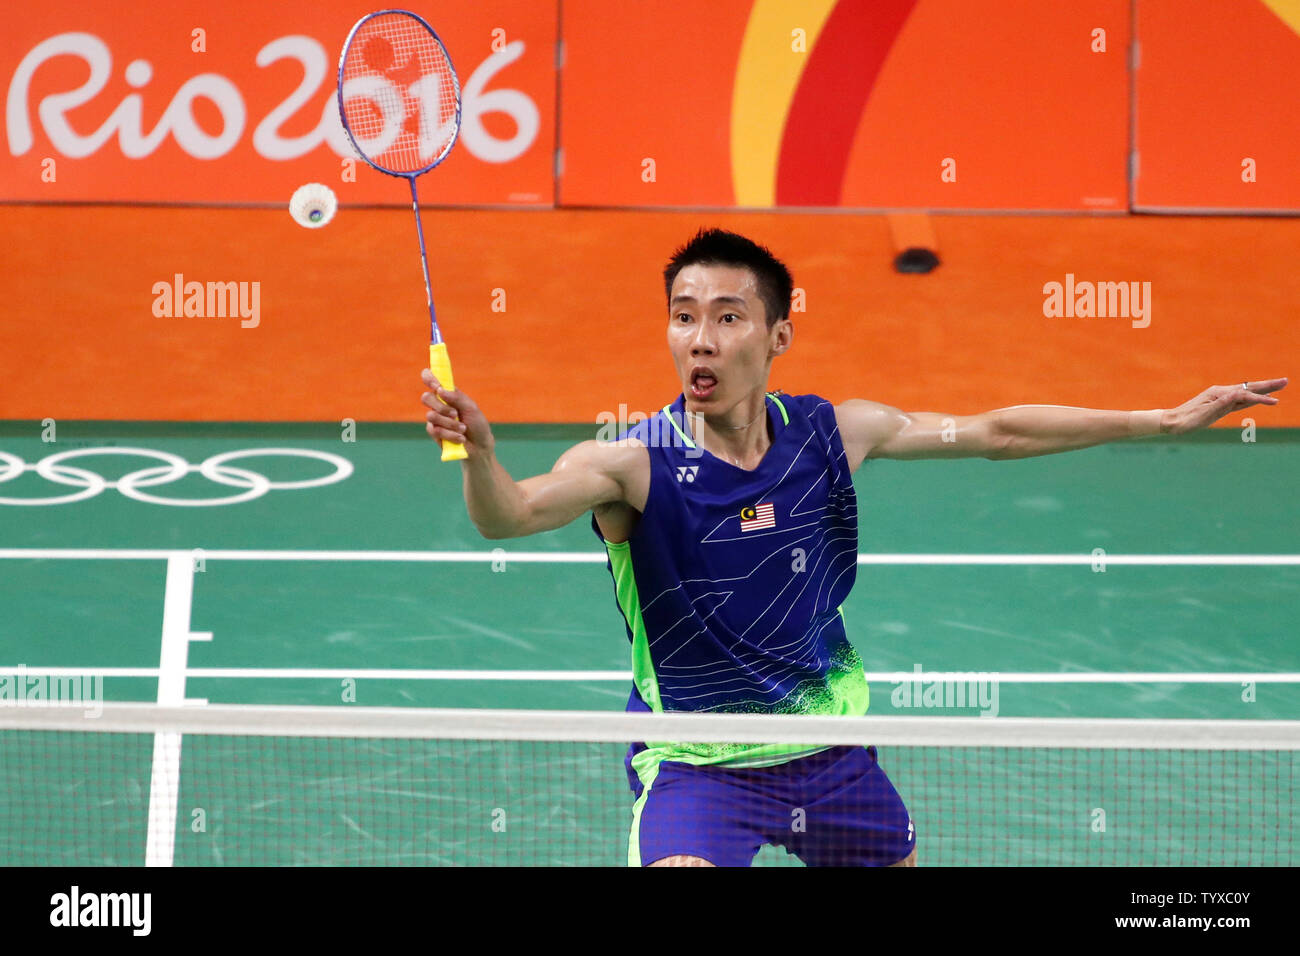 Malaysia's Chong Wei Lee takes on China's Long Chen (not pictured) in the Men's Badminton Singles gold medal match at the 2016 Rio Summer Olympics in Rio de Janeiro, Brazil, on August 20, 2016. Chen defeated Lee to win the gold medal.    Photo by Matthew Healey/UPI Stock Photo